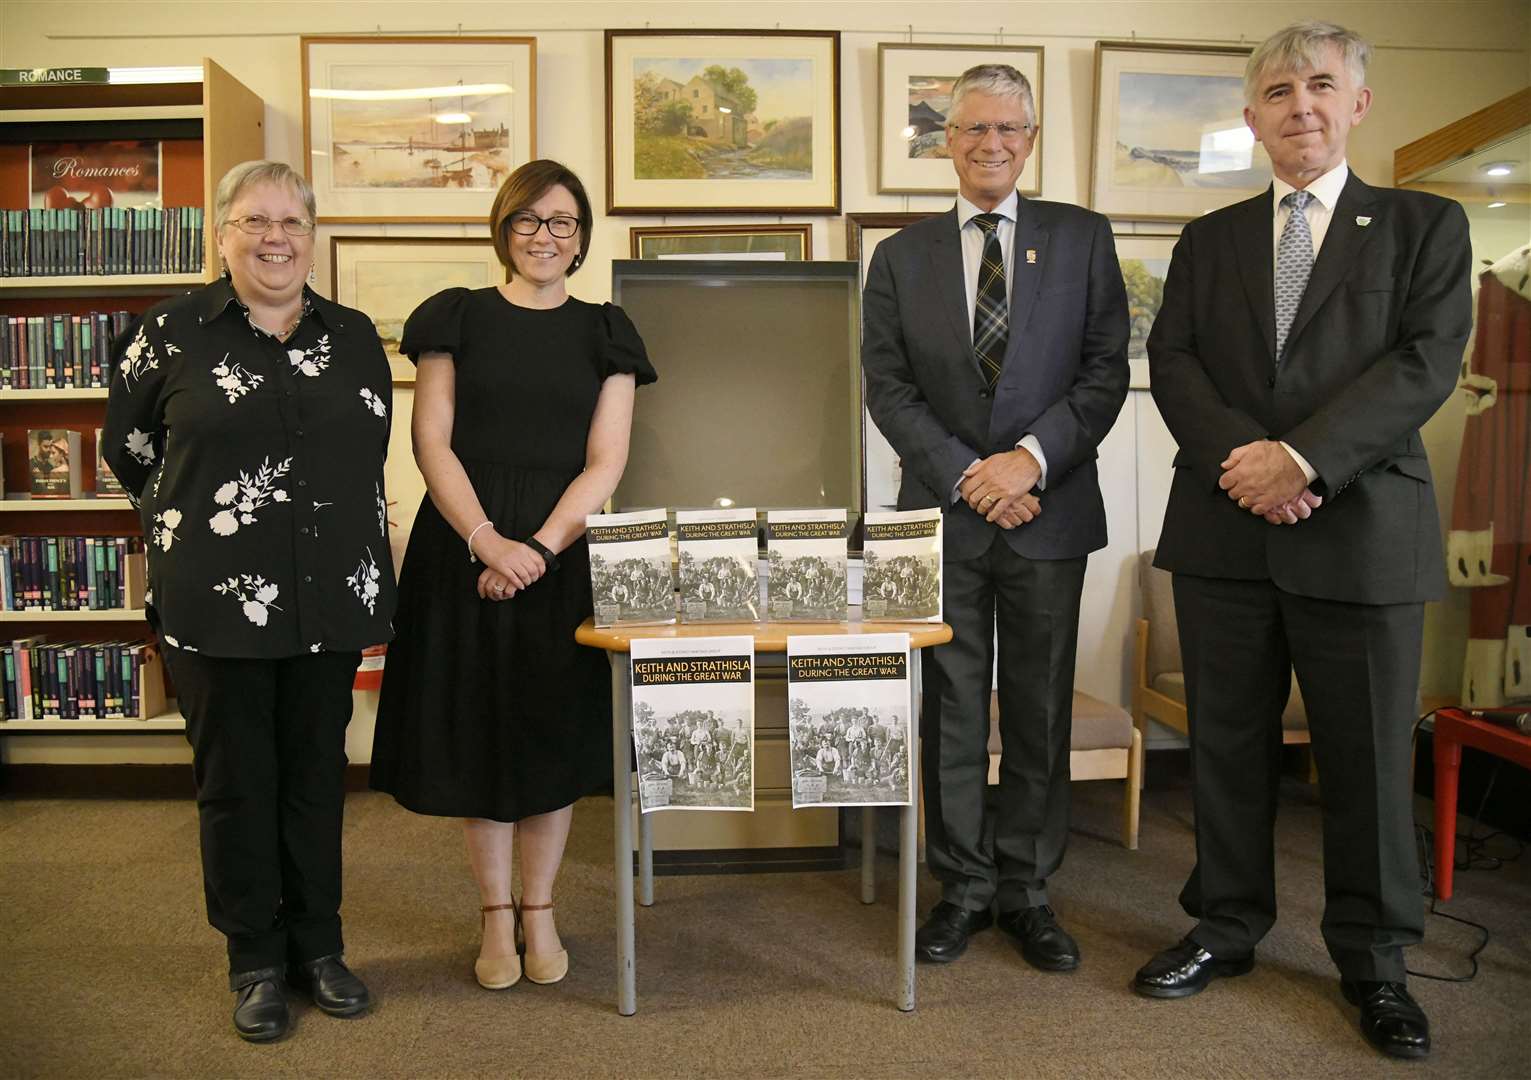 From left: Janice Meldrum (Coordinator for Keith and District Heritage Centre), Esther Green, Lord-Lieutenant Andrew Simpson and Donald Gatt (local councillor) at the book launch at Keith Library...Picture: Beth Taylor.